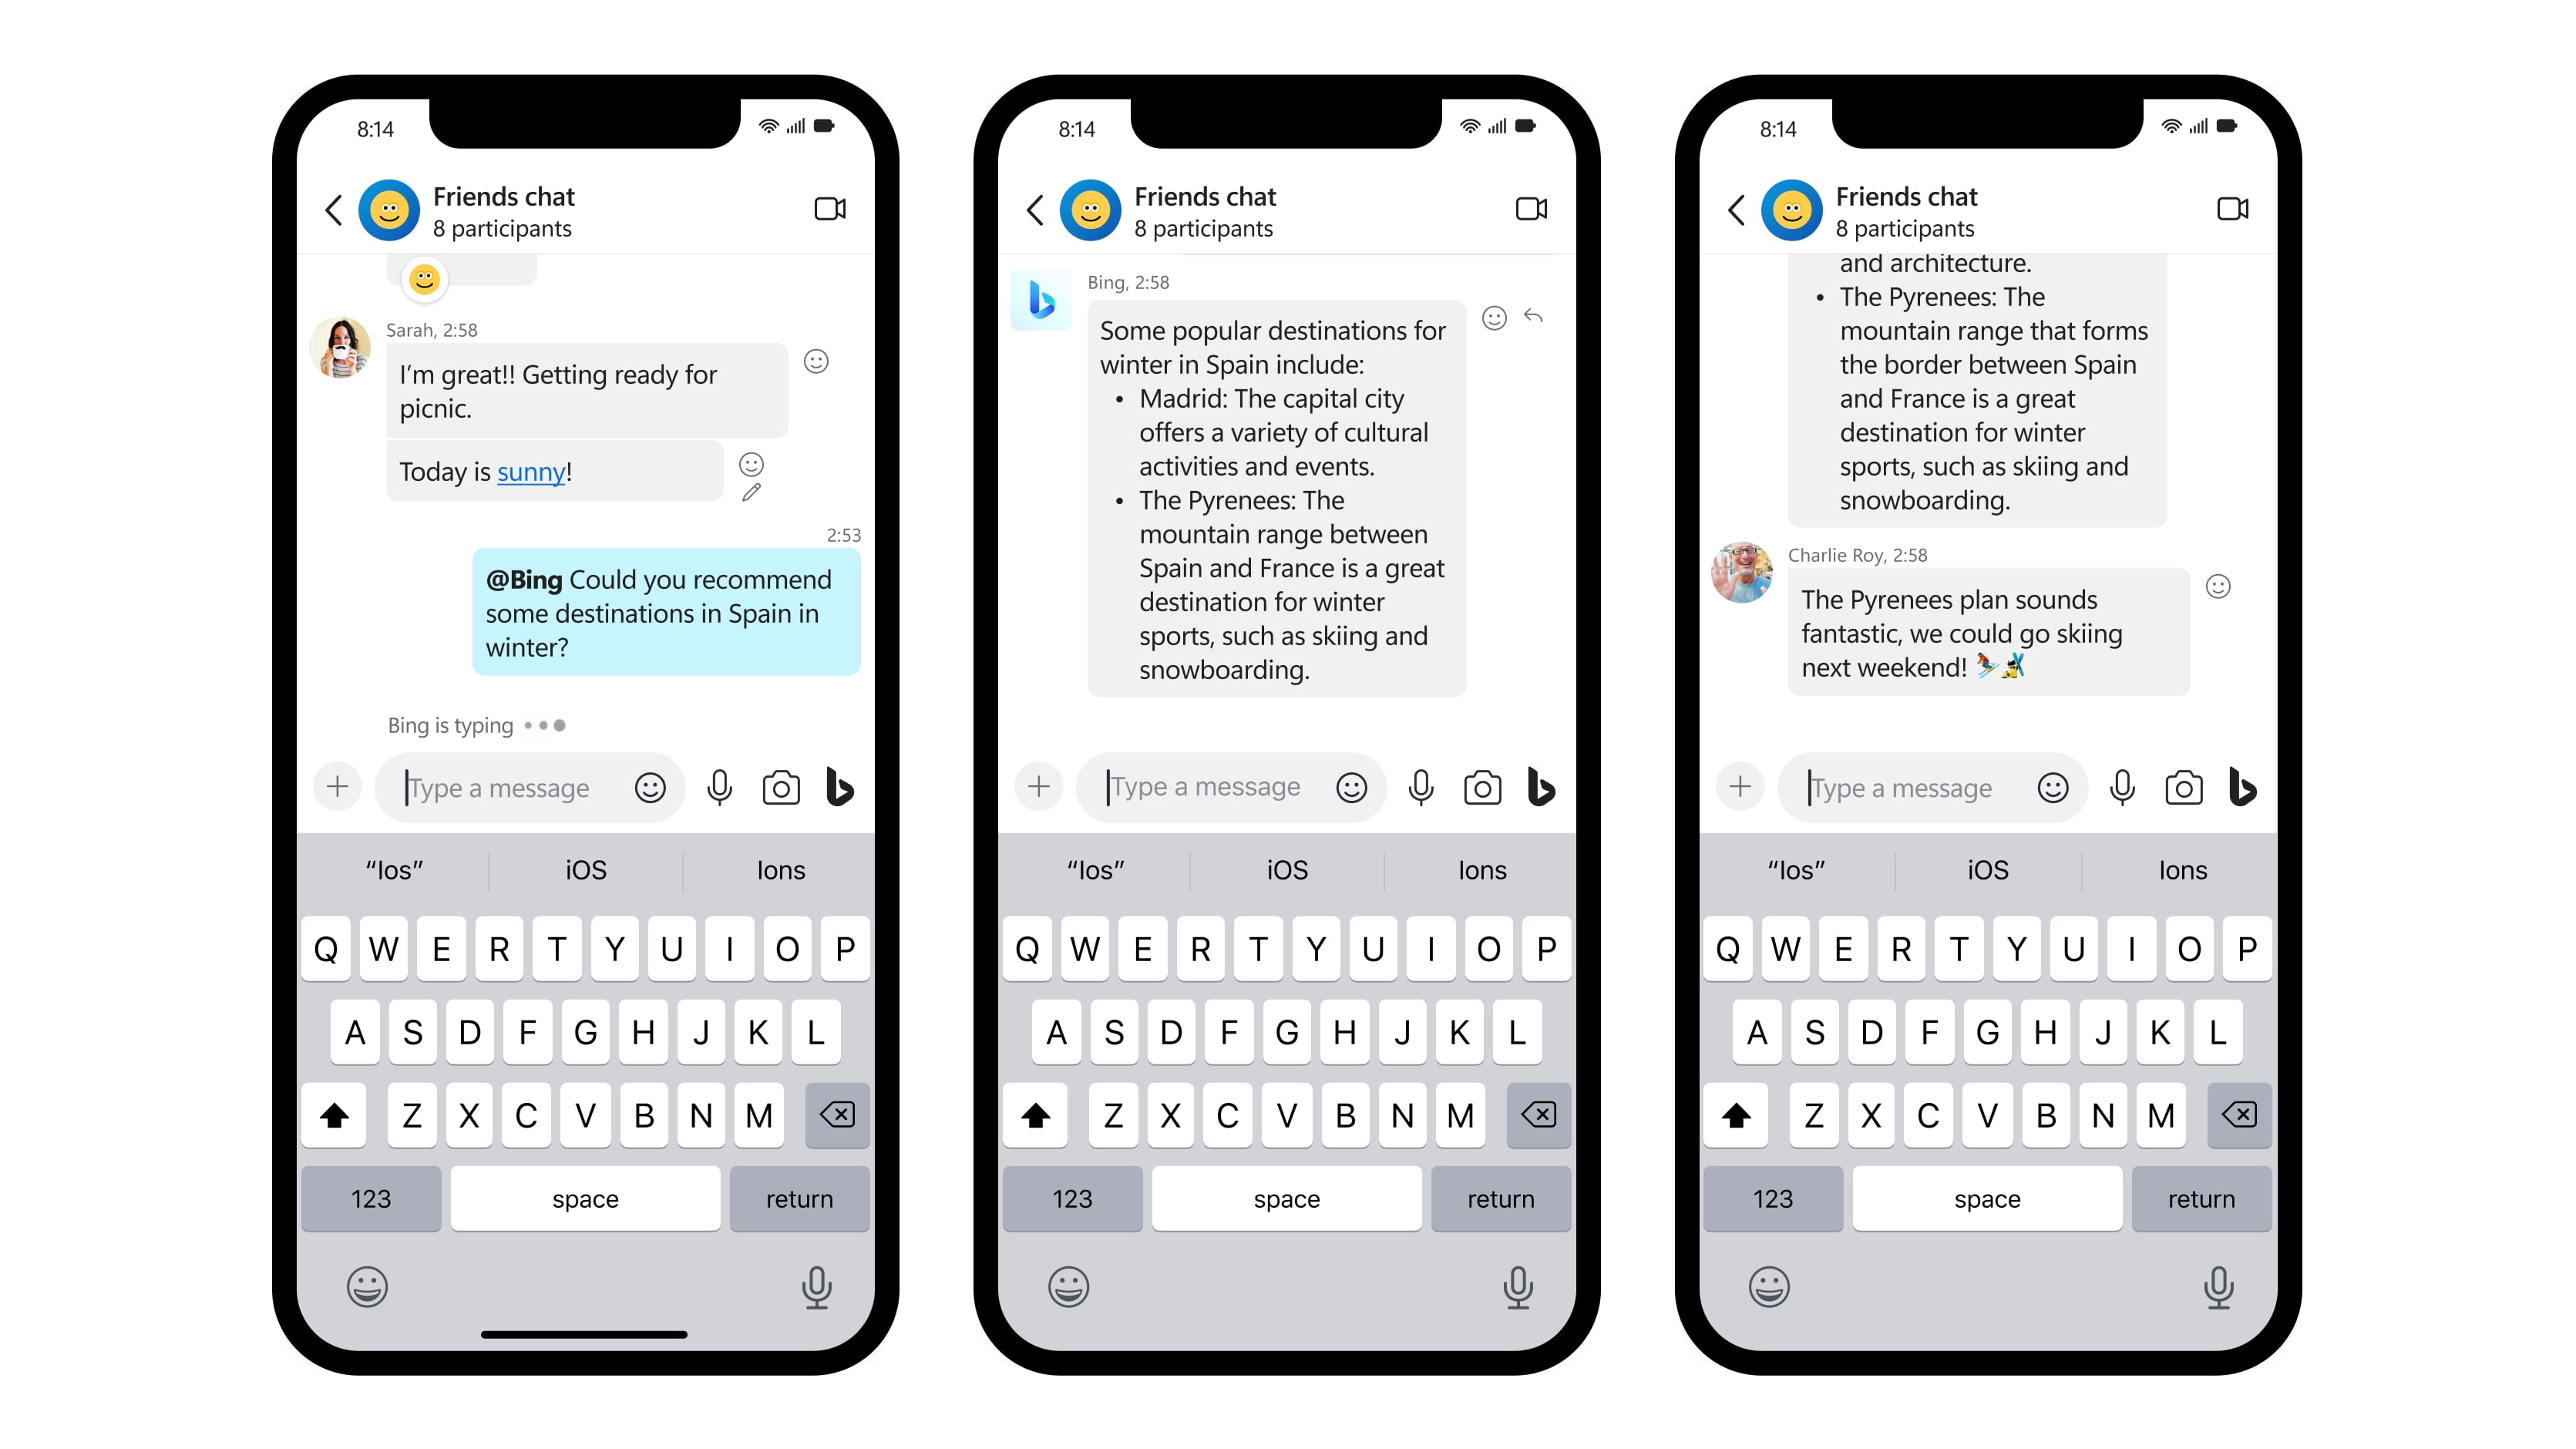 Examples of Bing AI chatbot session in Skype for iPhone 